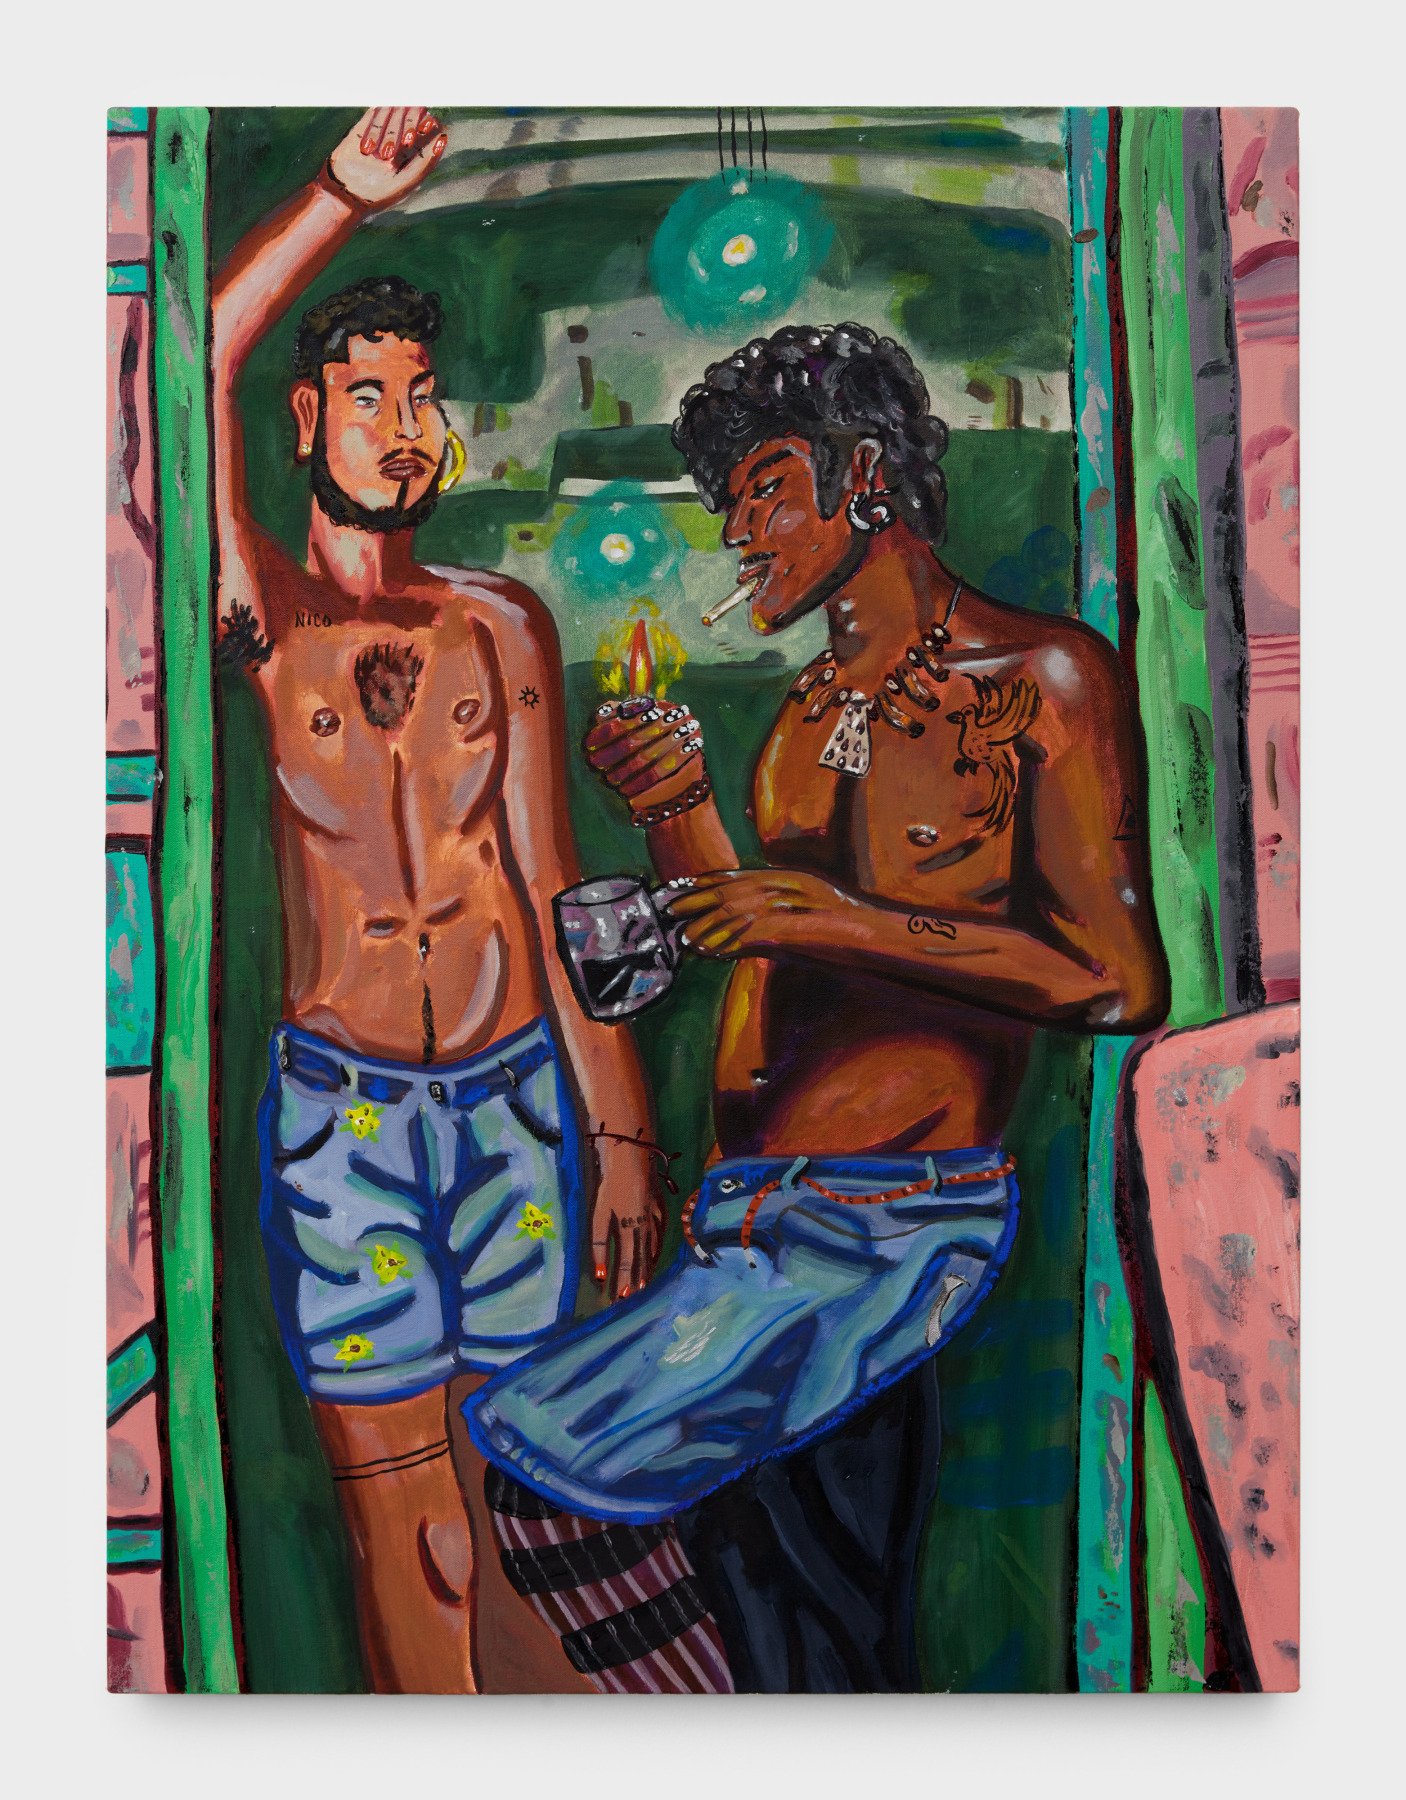 Marcel Alcalá's artwork "East Side Smoke Break". Two shirtless figures stand in a doorway while one lights a cigarette. 40 x 30 in (101.6 x 76.2 cm), oil on canvas, 2023